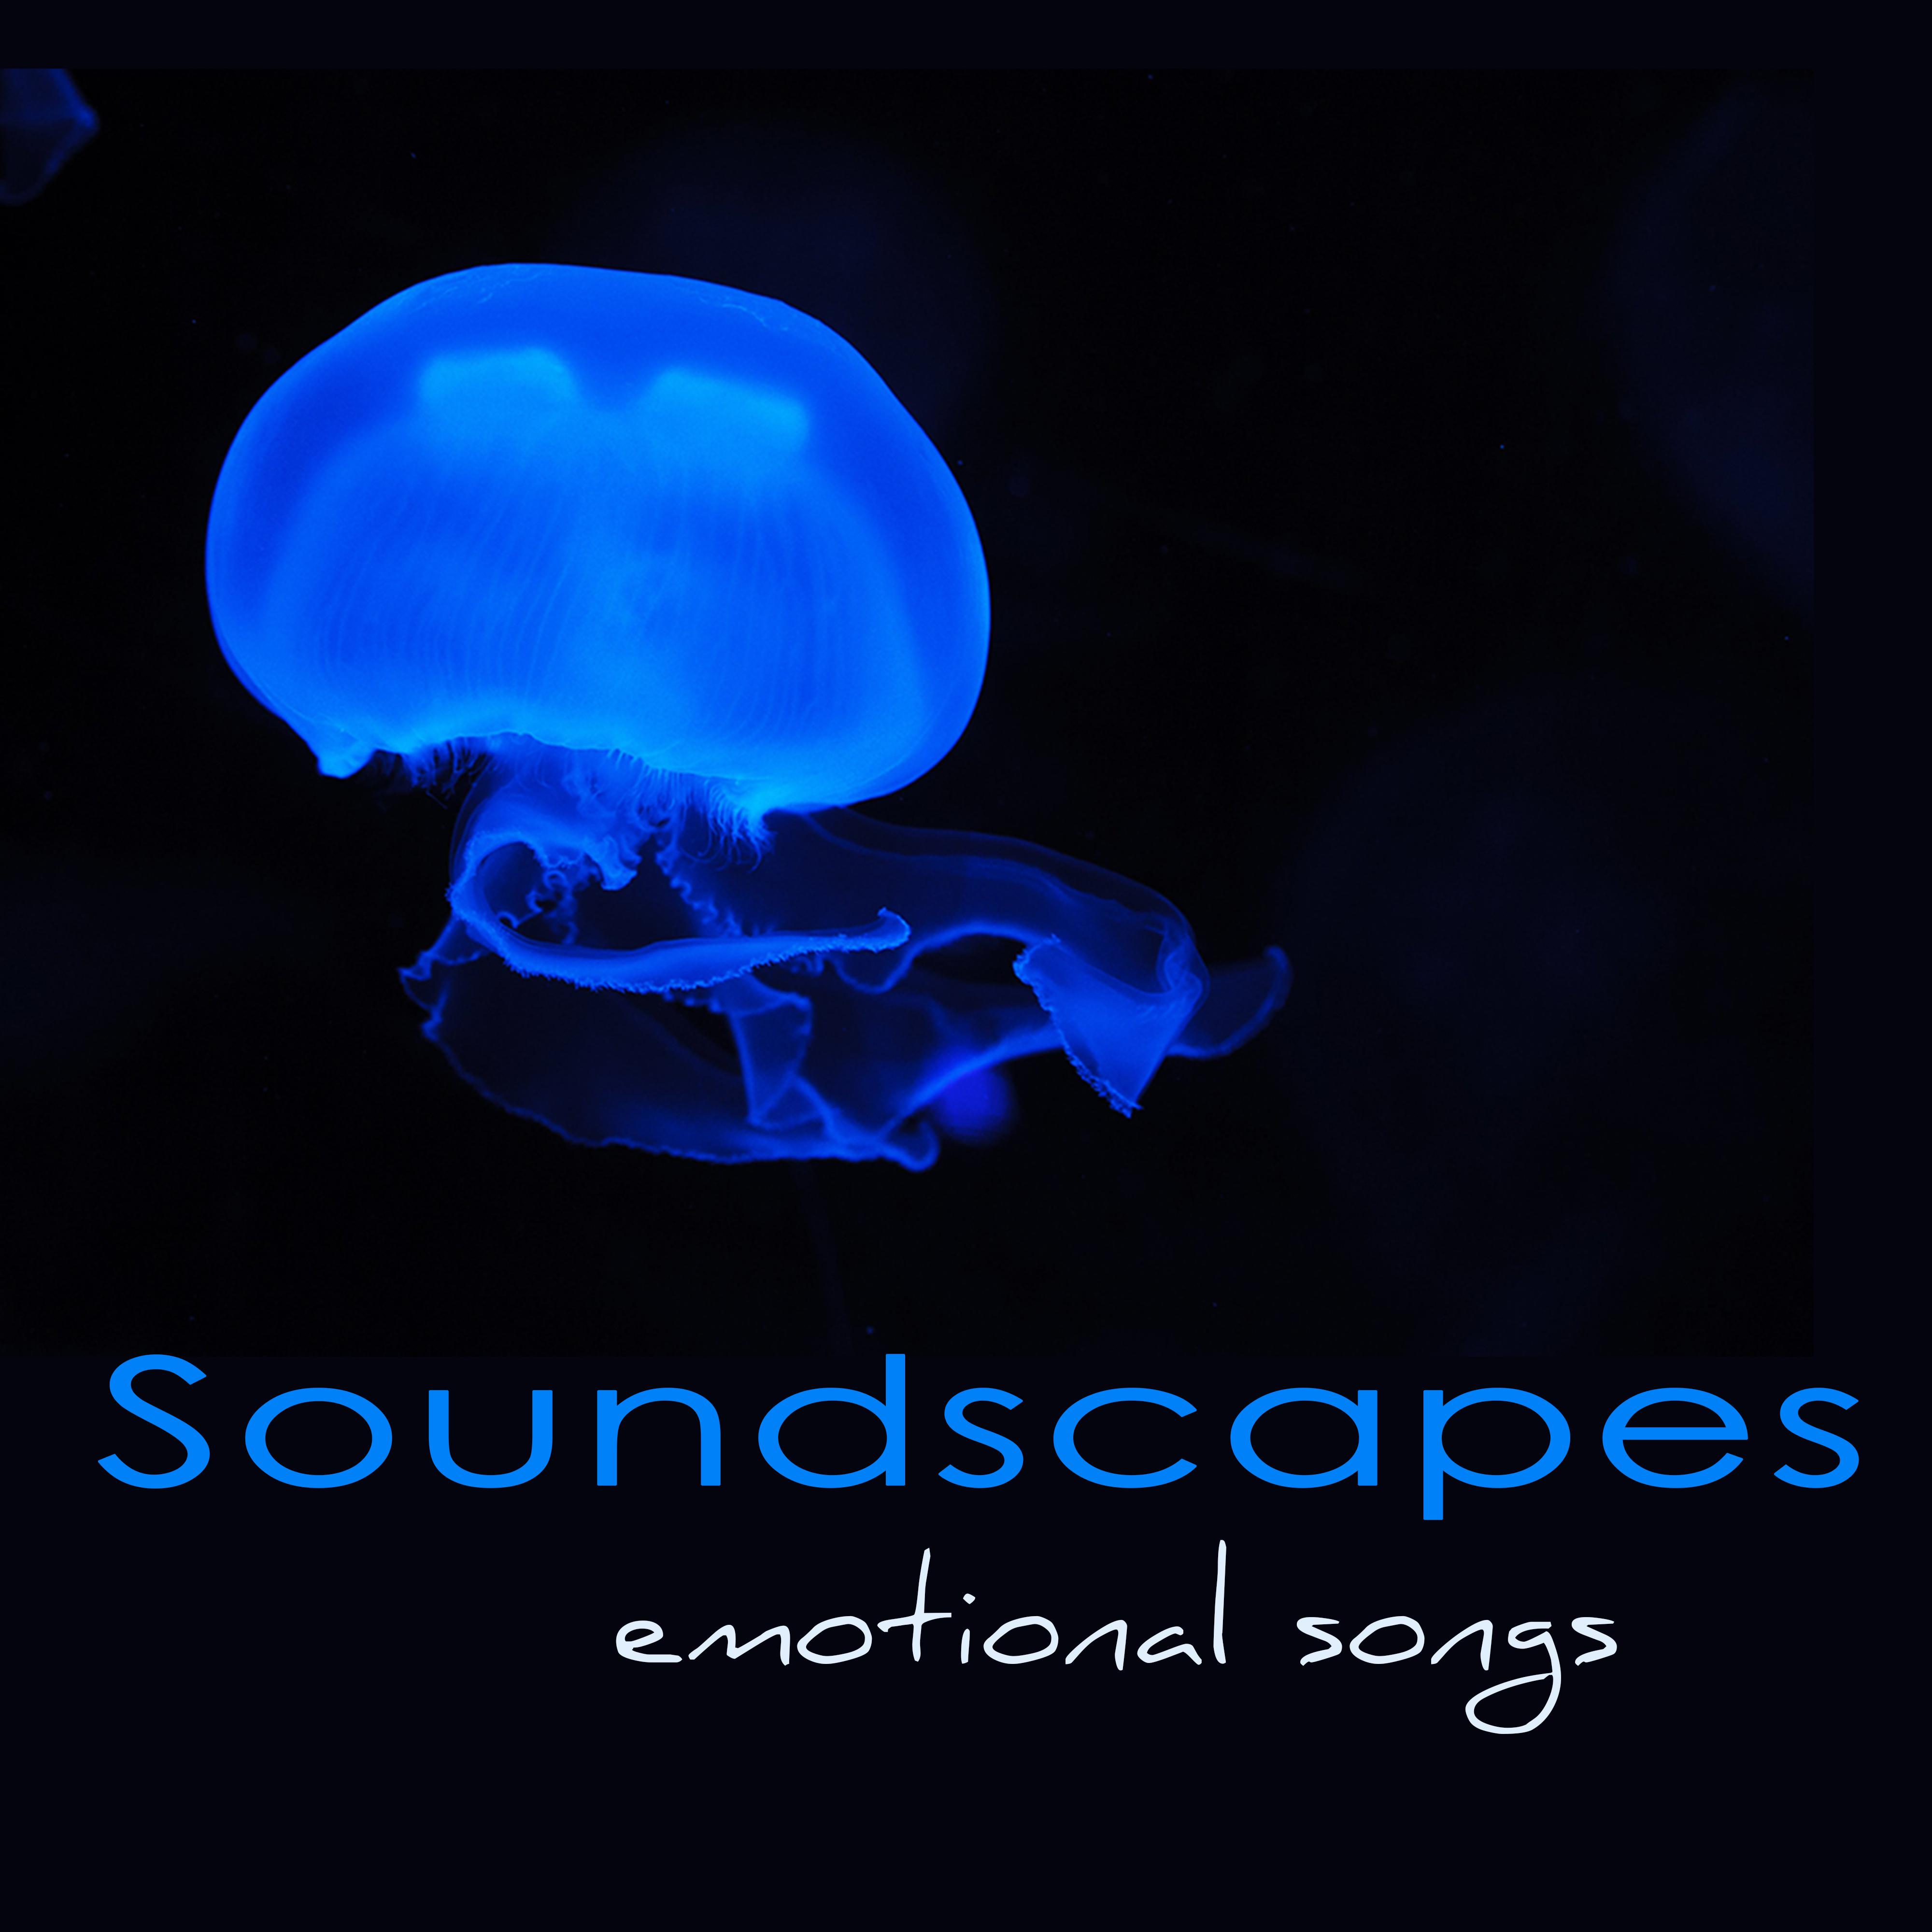 Soundscapes Emotional Songs – Atmosphere. Angels, Ambient New Age Music